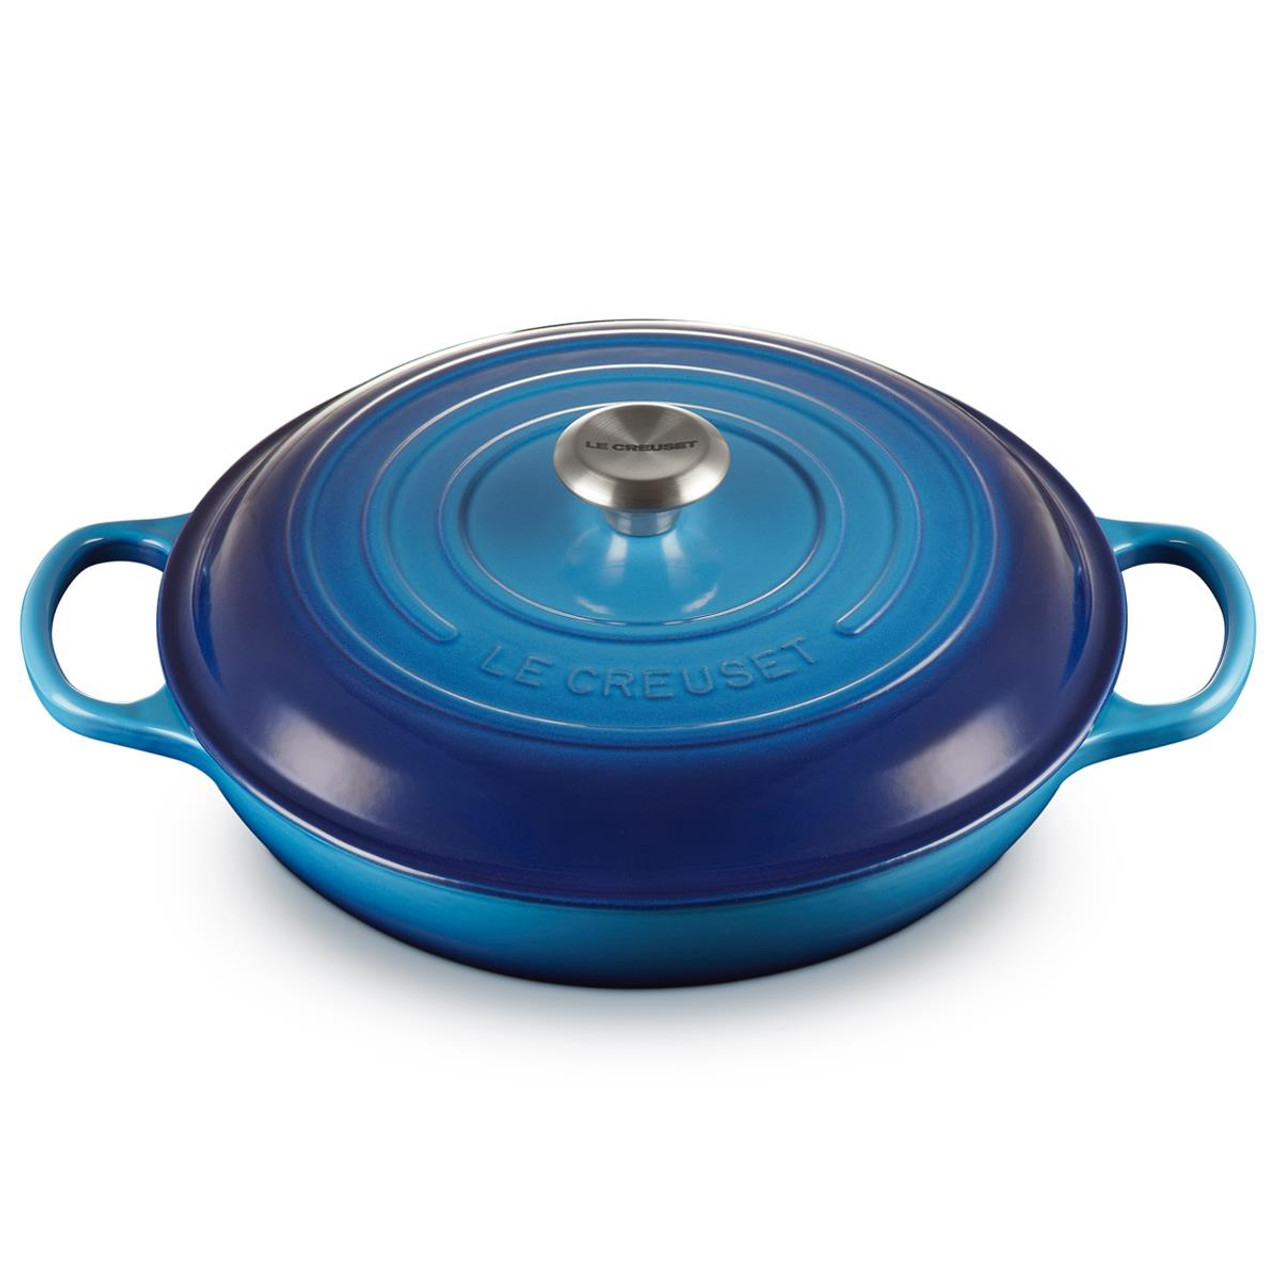 What is the purpose of the tight lid on the Le Creuset shallow casserole dish?